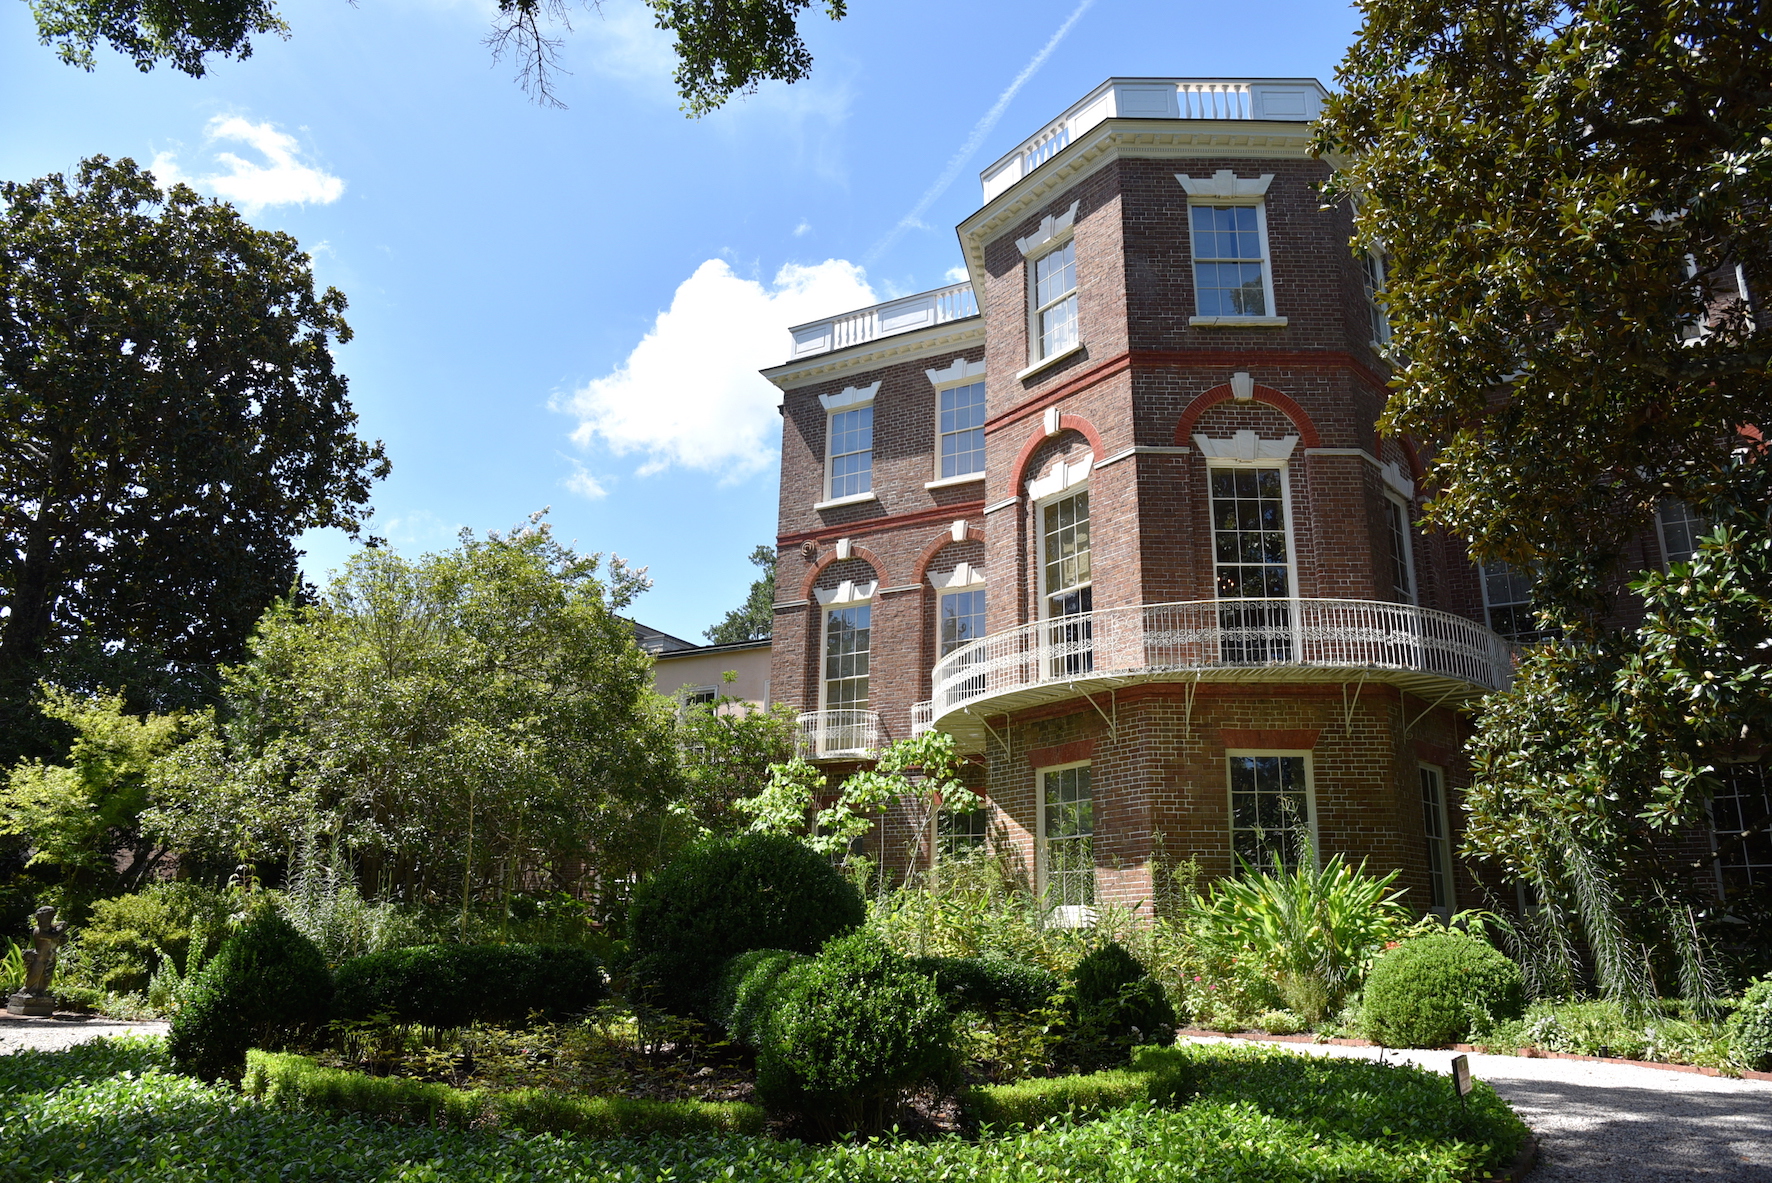 Nathaniel Russel house tour in Charleston, SC